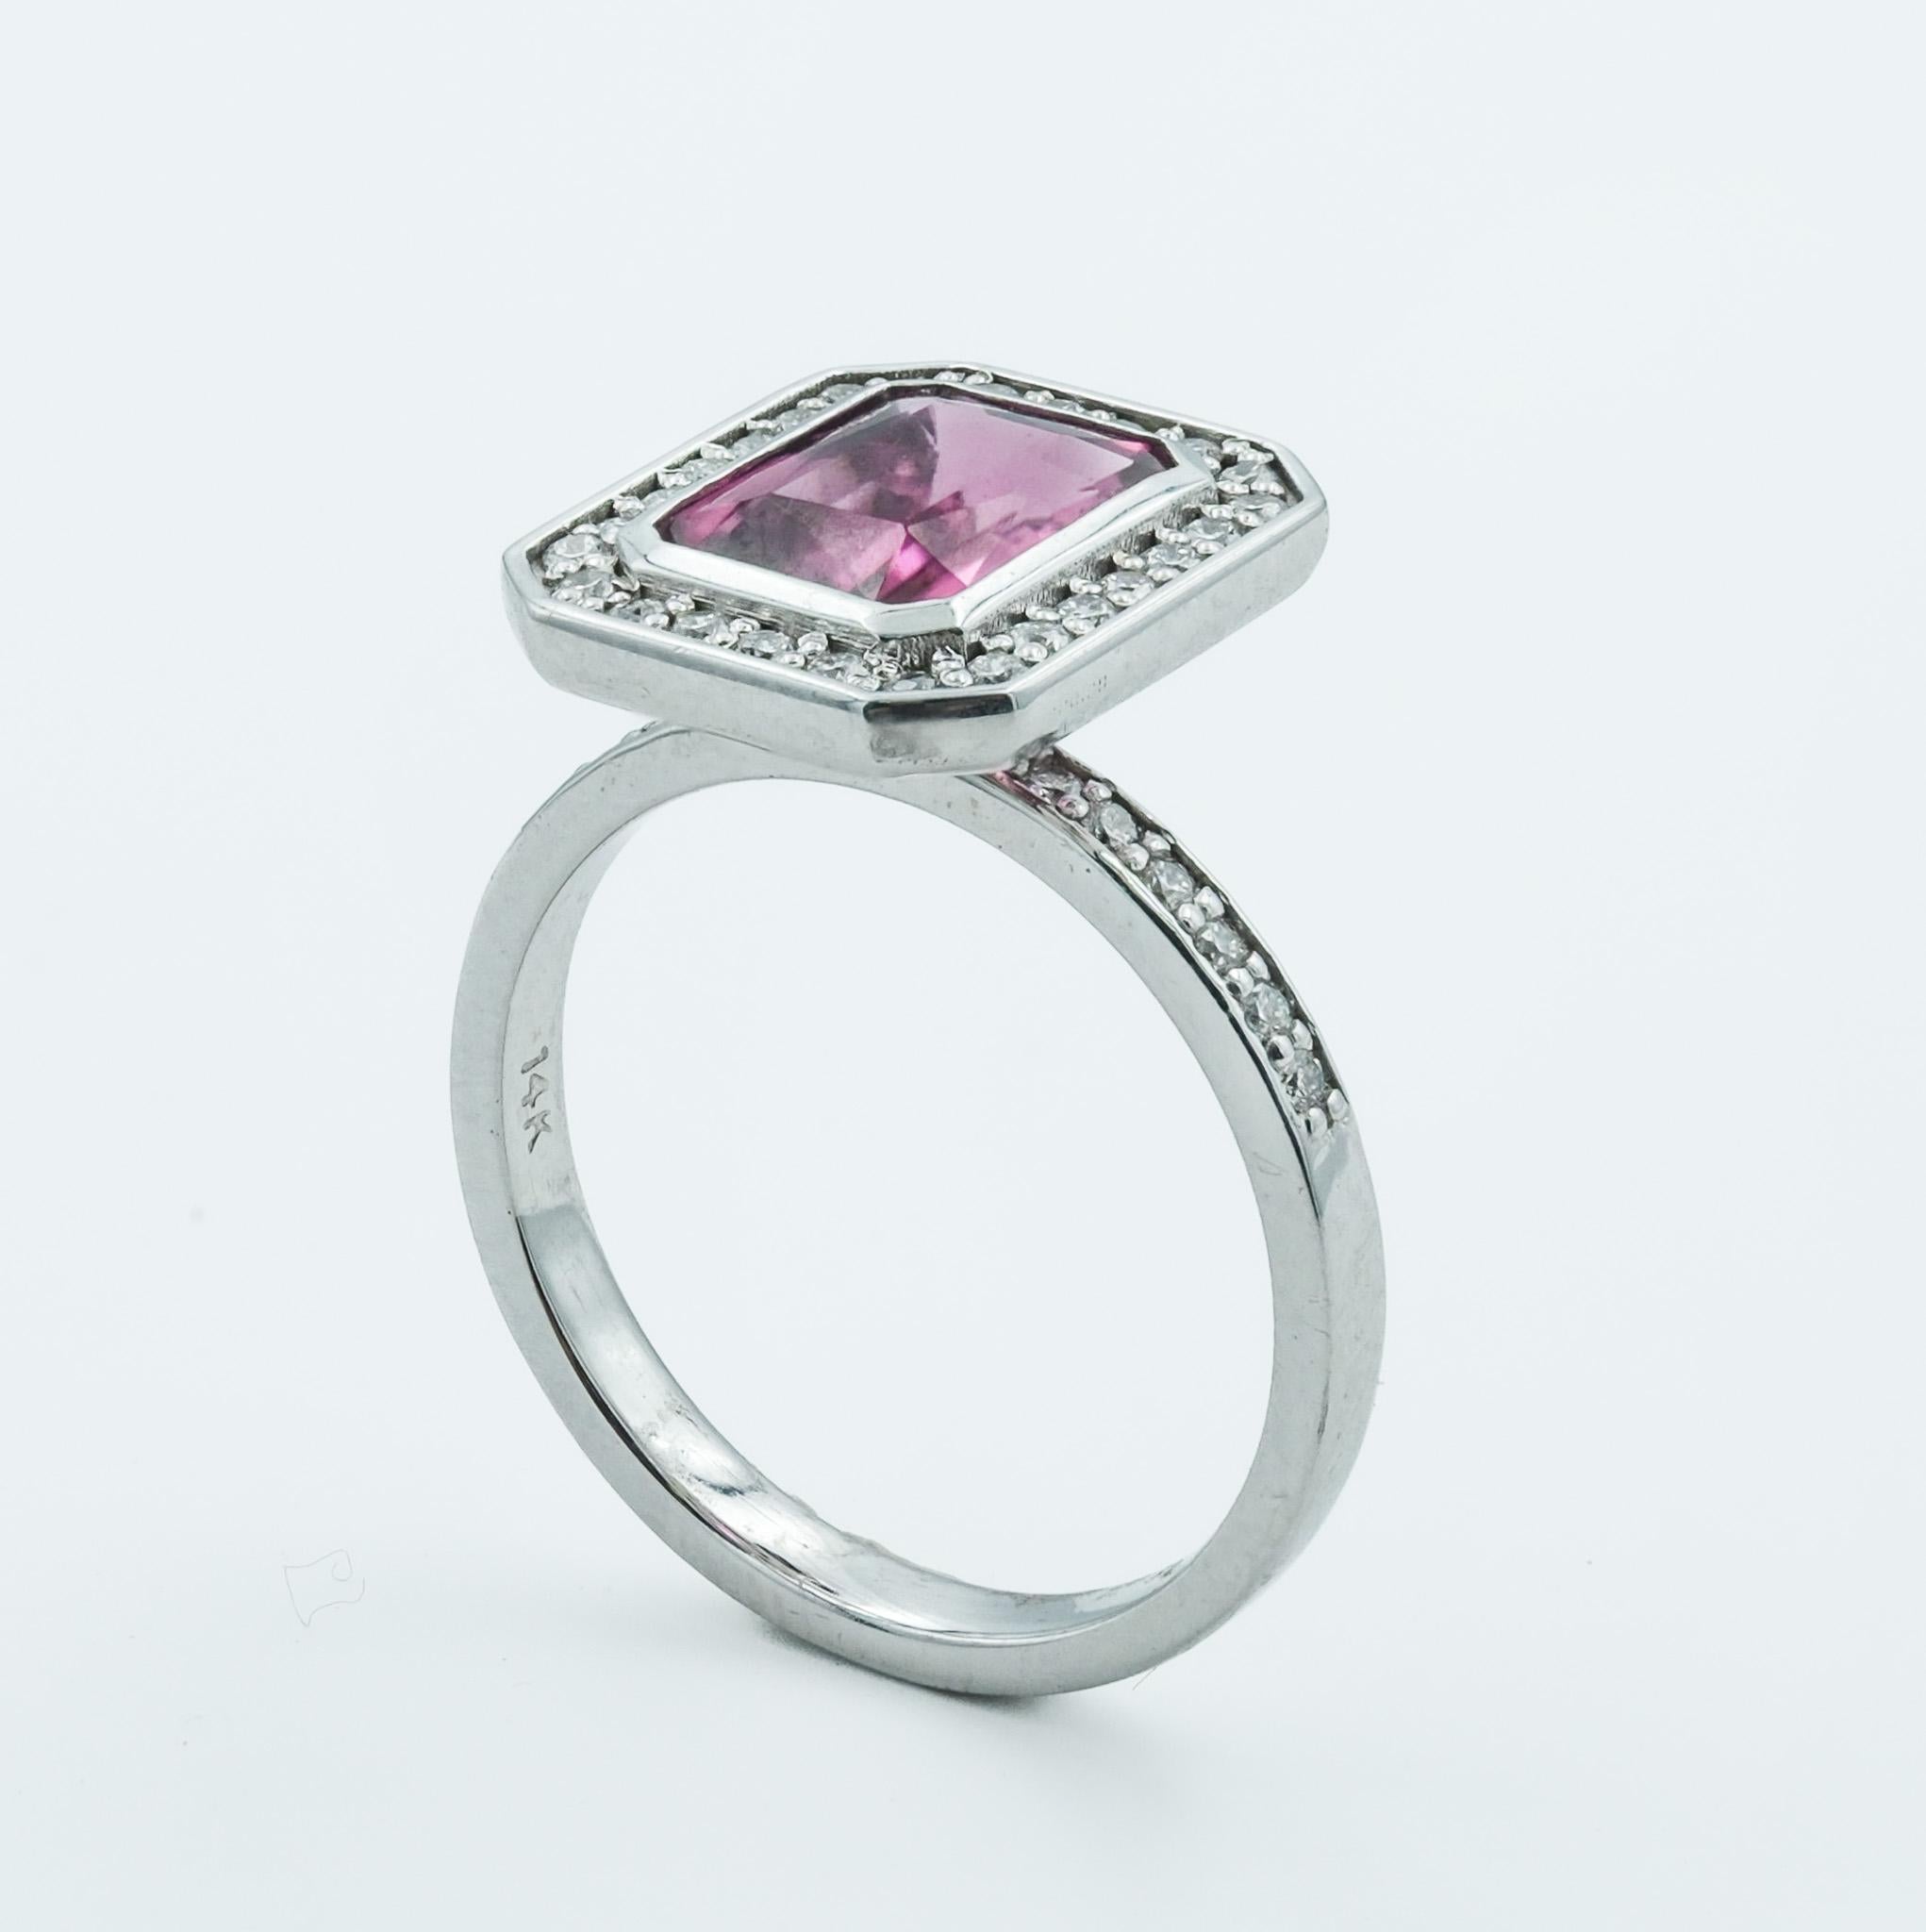 Crafted with precision, this ring is a paragon of classic design, featuring a 1.75 carat faceted bezel set tourmaline as its centerpiece. The tourmaline's rich color is encapsulated in a 14 karat white gold setting, which reflects a timeless sense